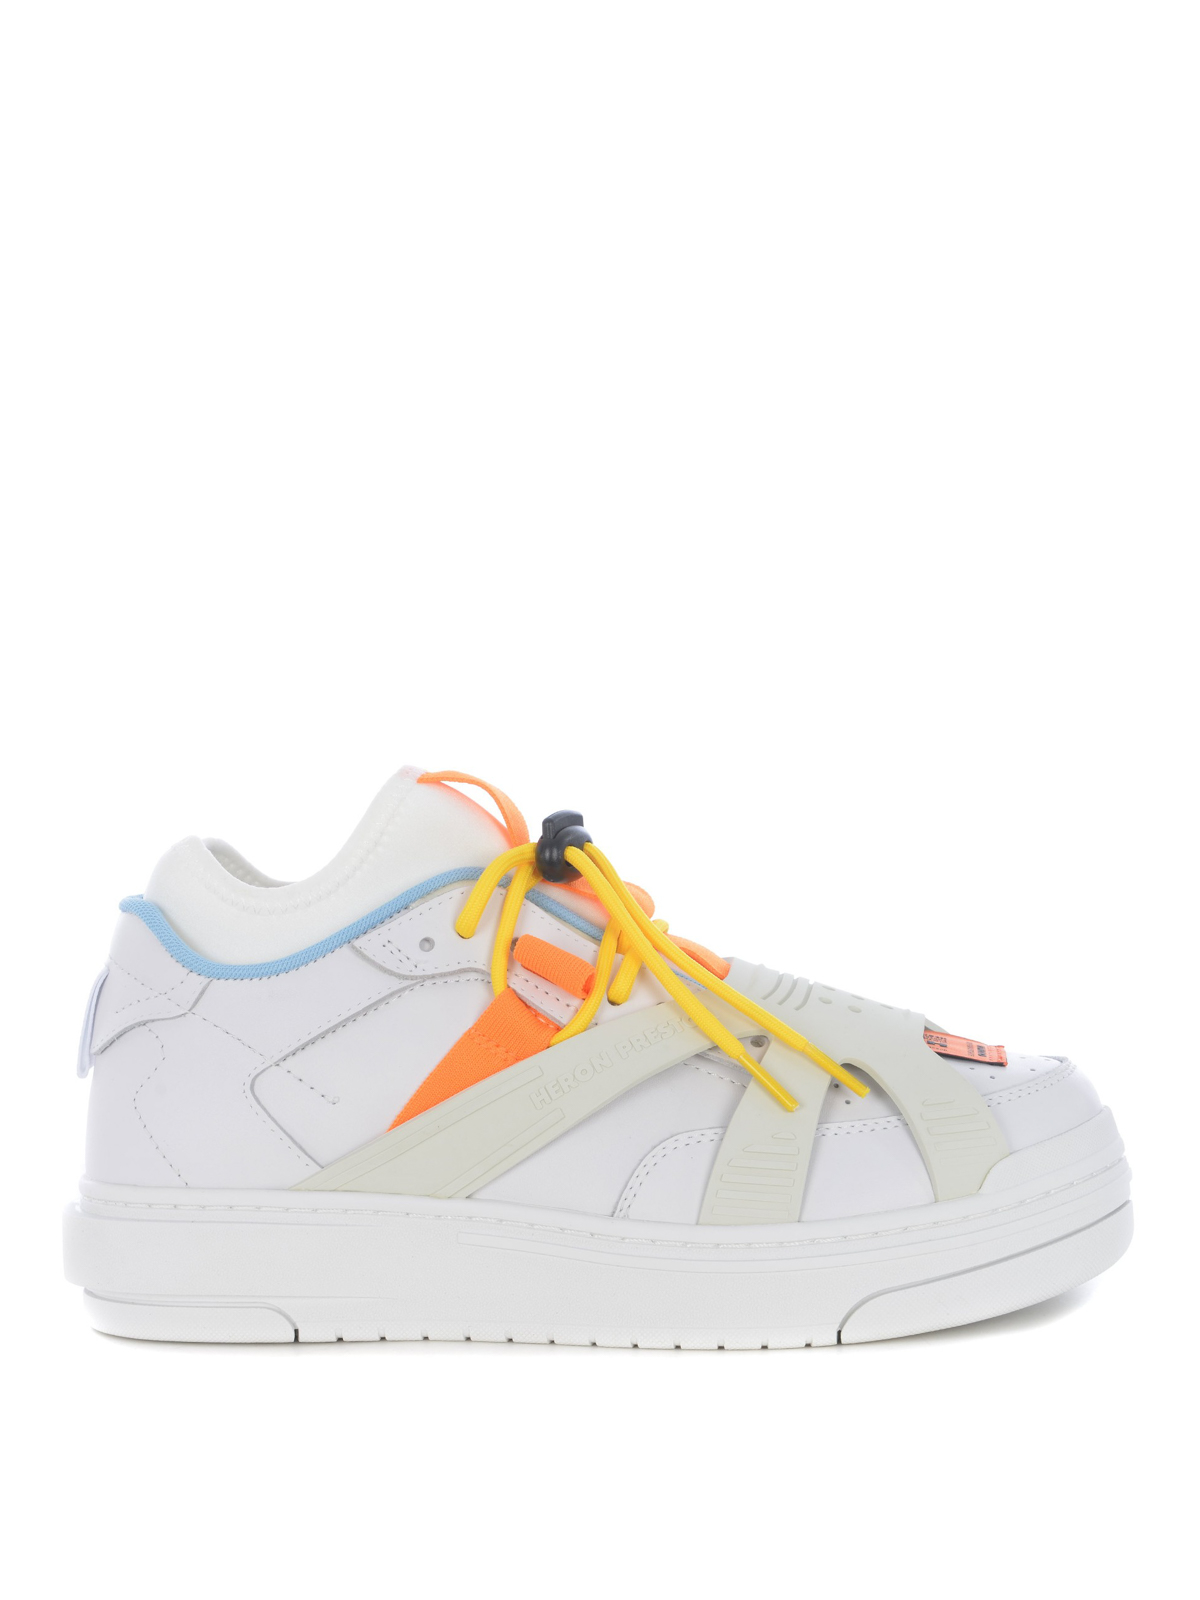 Trainers Heron Preston - Protection leather sneakers 